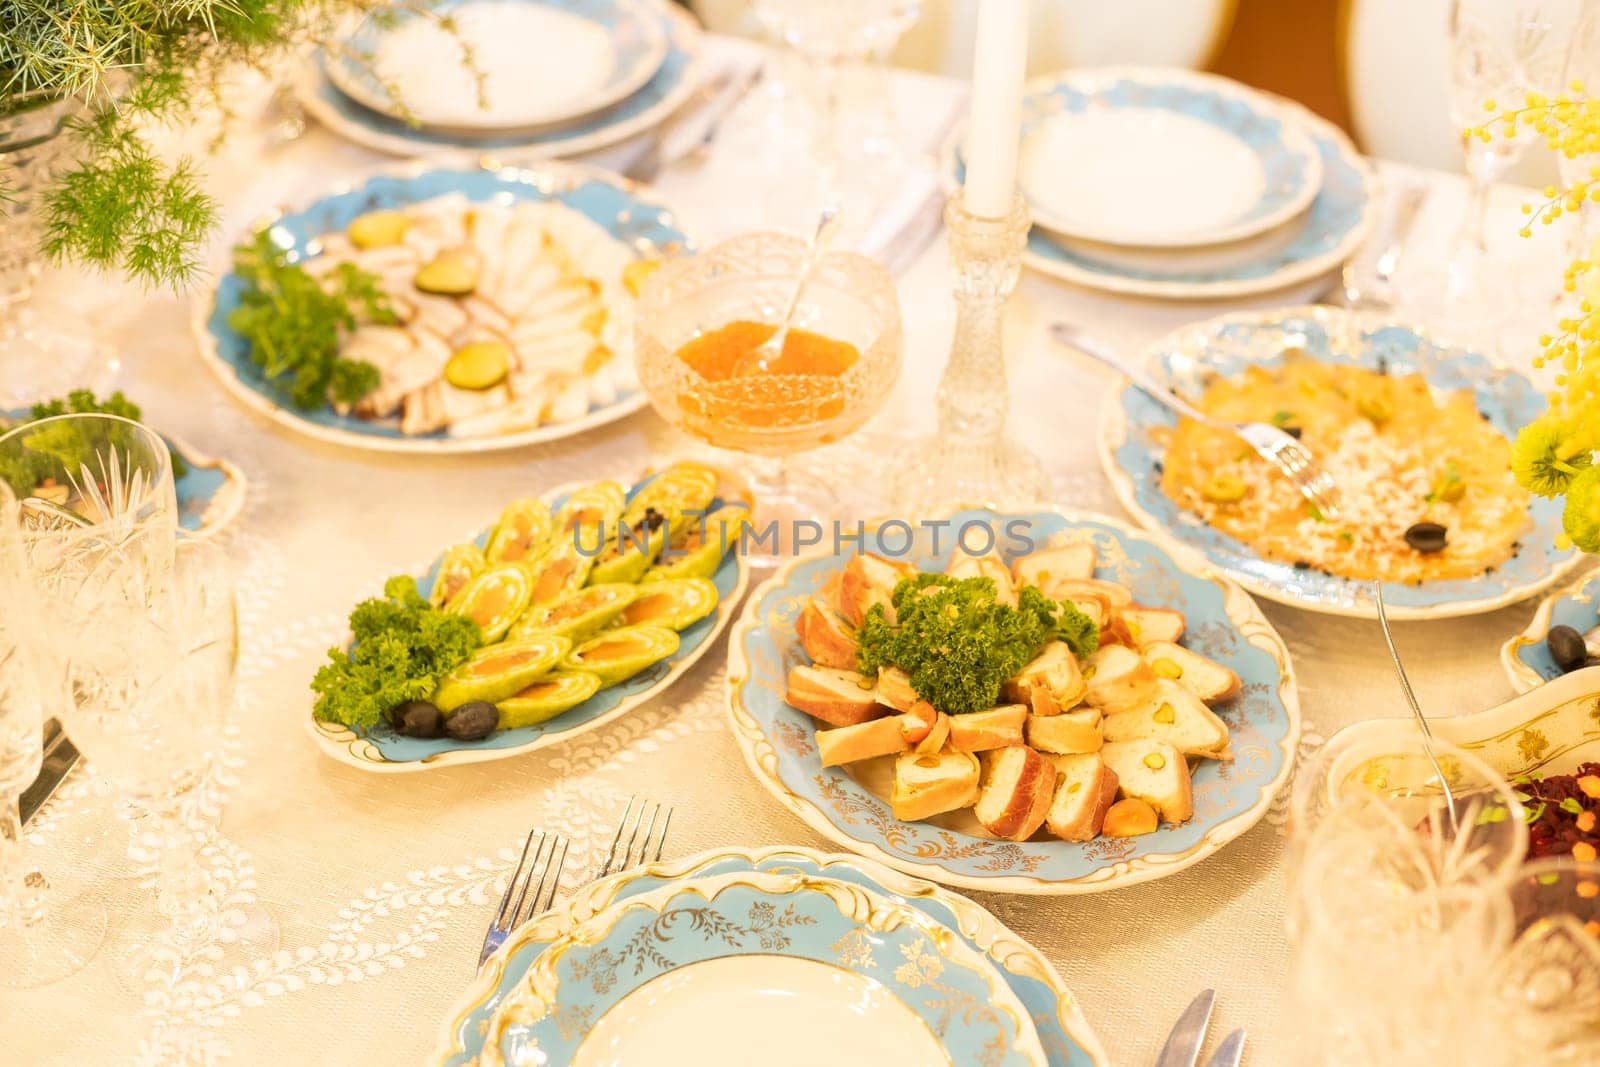 large and generously covered with delicious dishes table, covered with a tablecloth on which there are various delicious dishes of Ukrainian cuisine: salads, cheese.